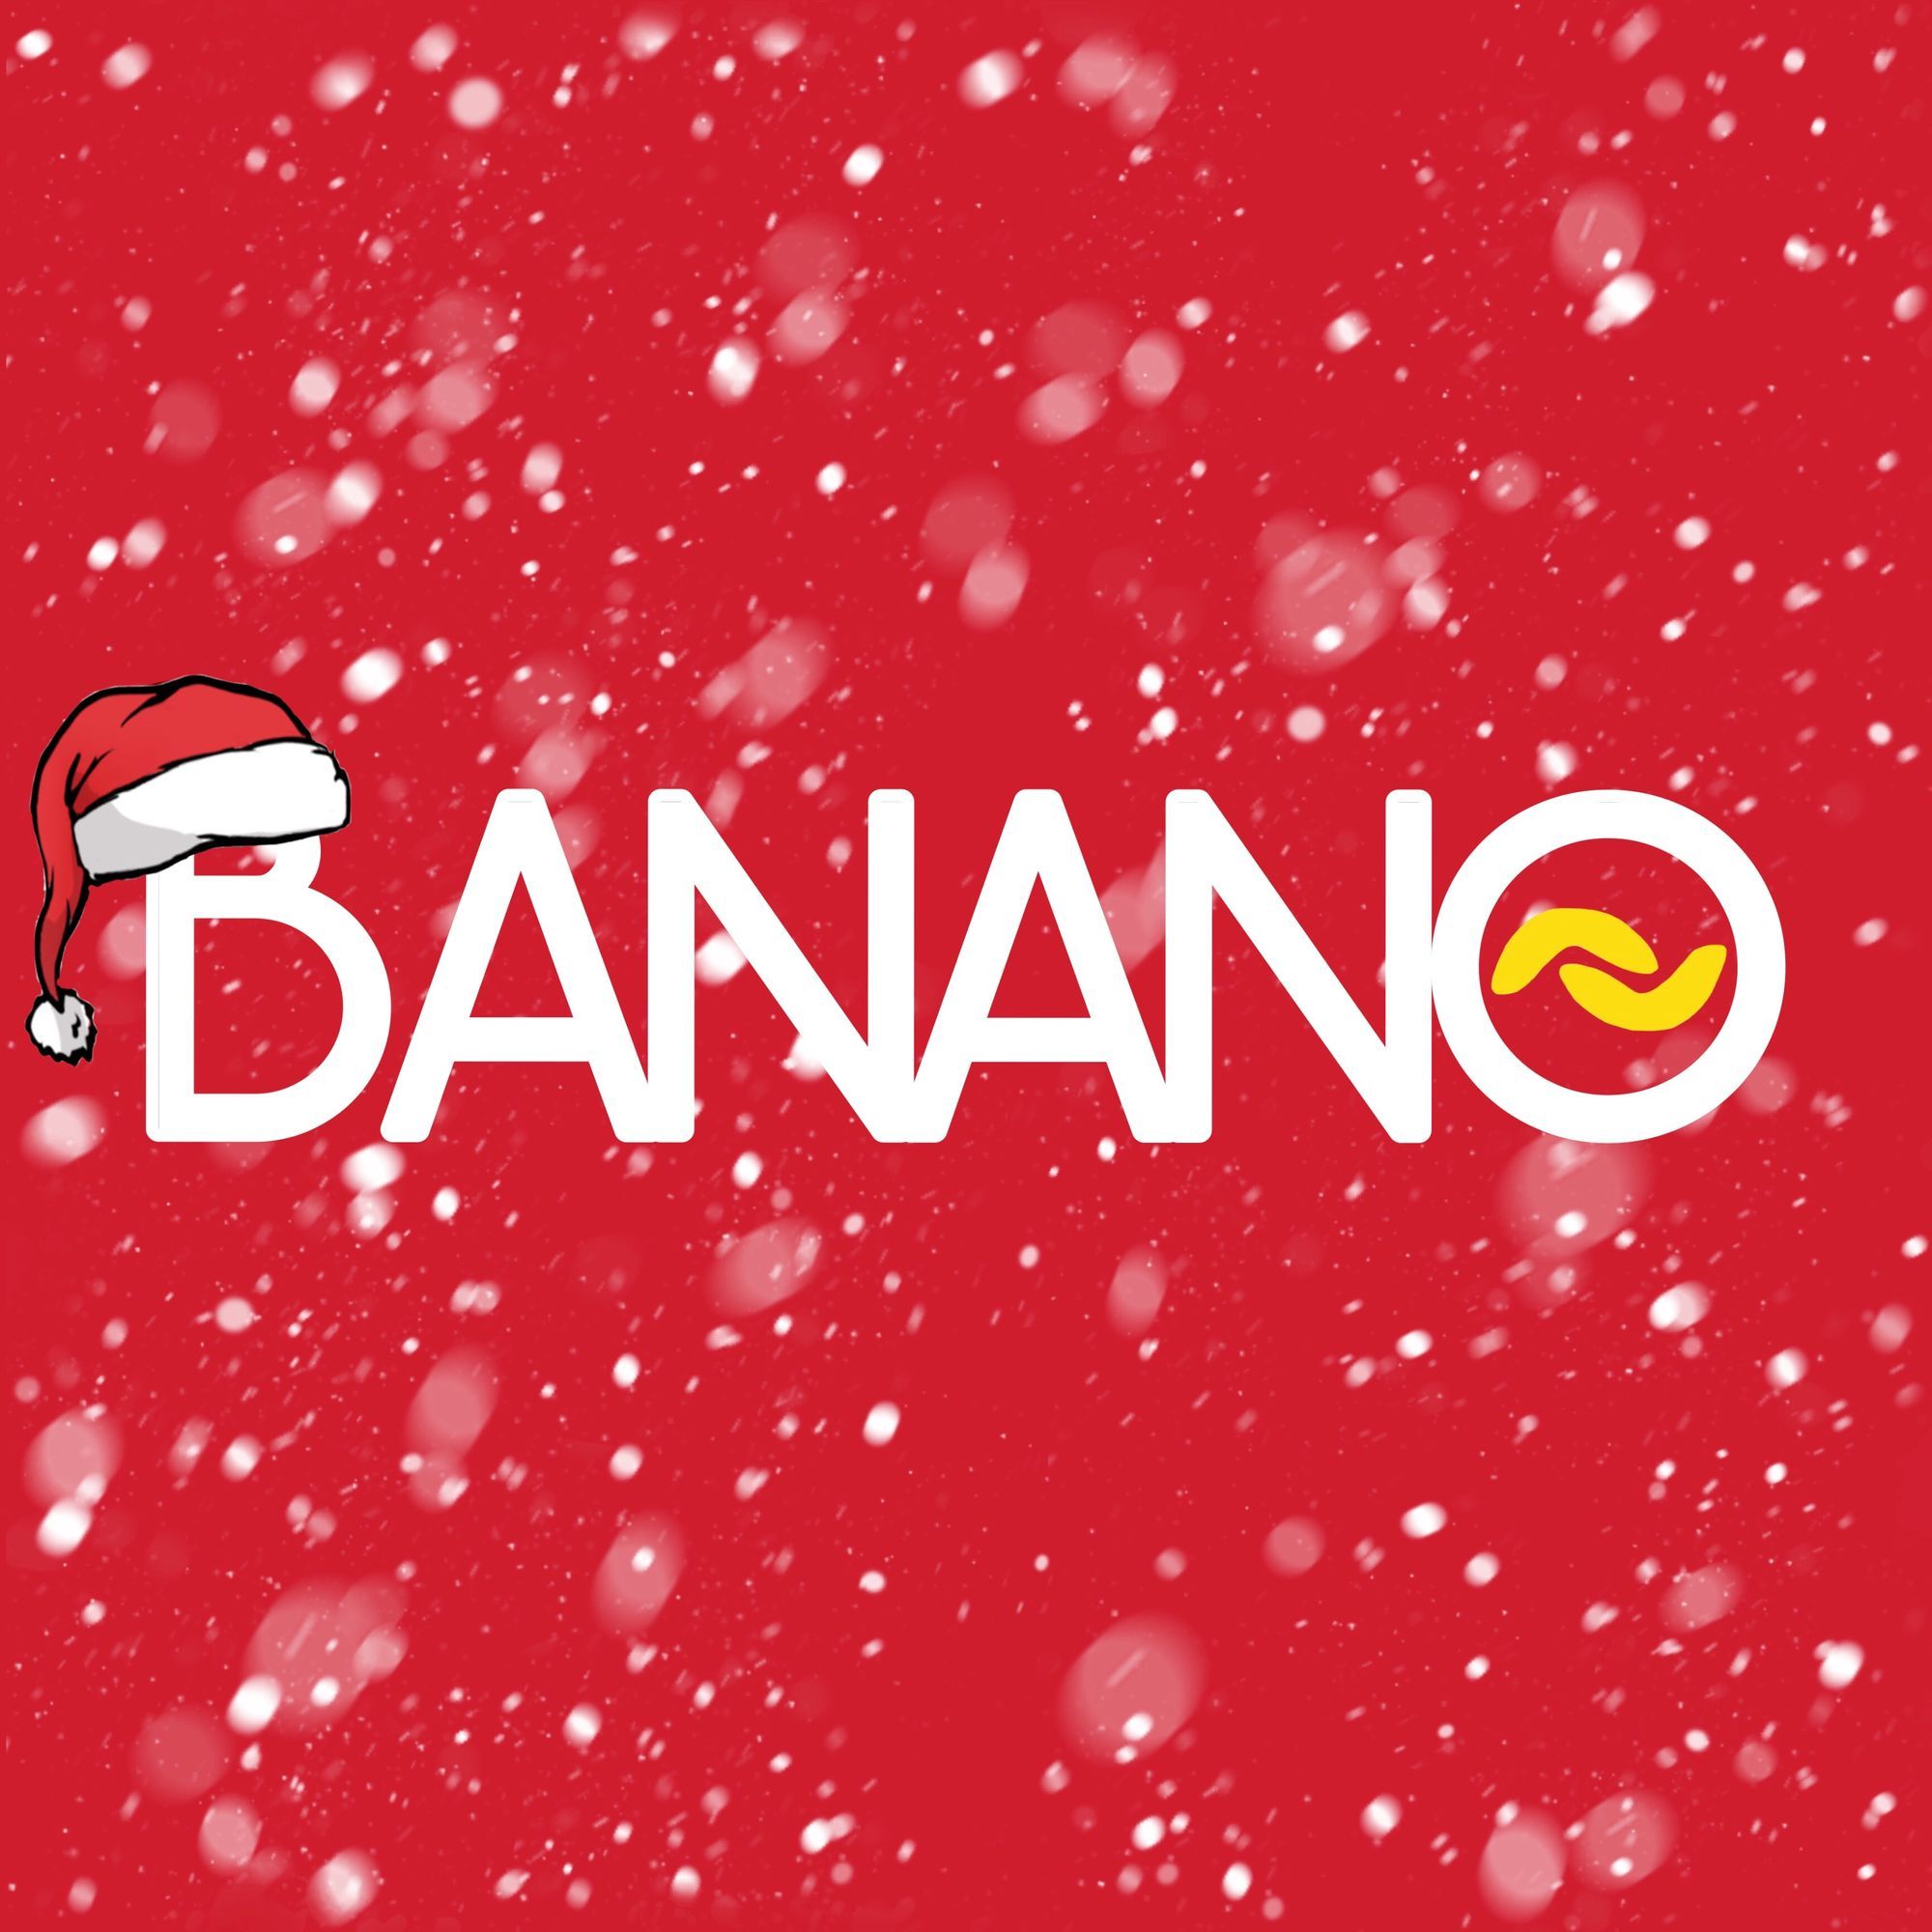 Reminder: The BANANO X-Mas Calendar has Daily Games, Puzzles and Events!